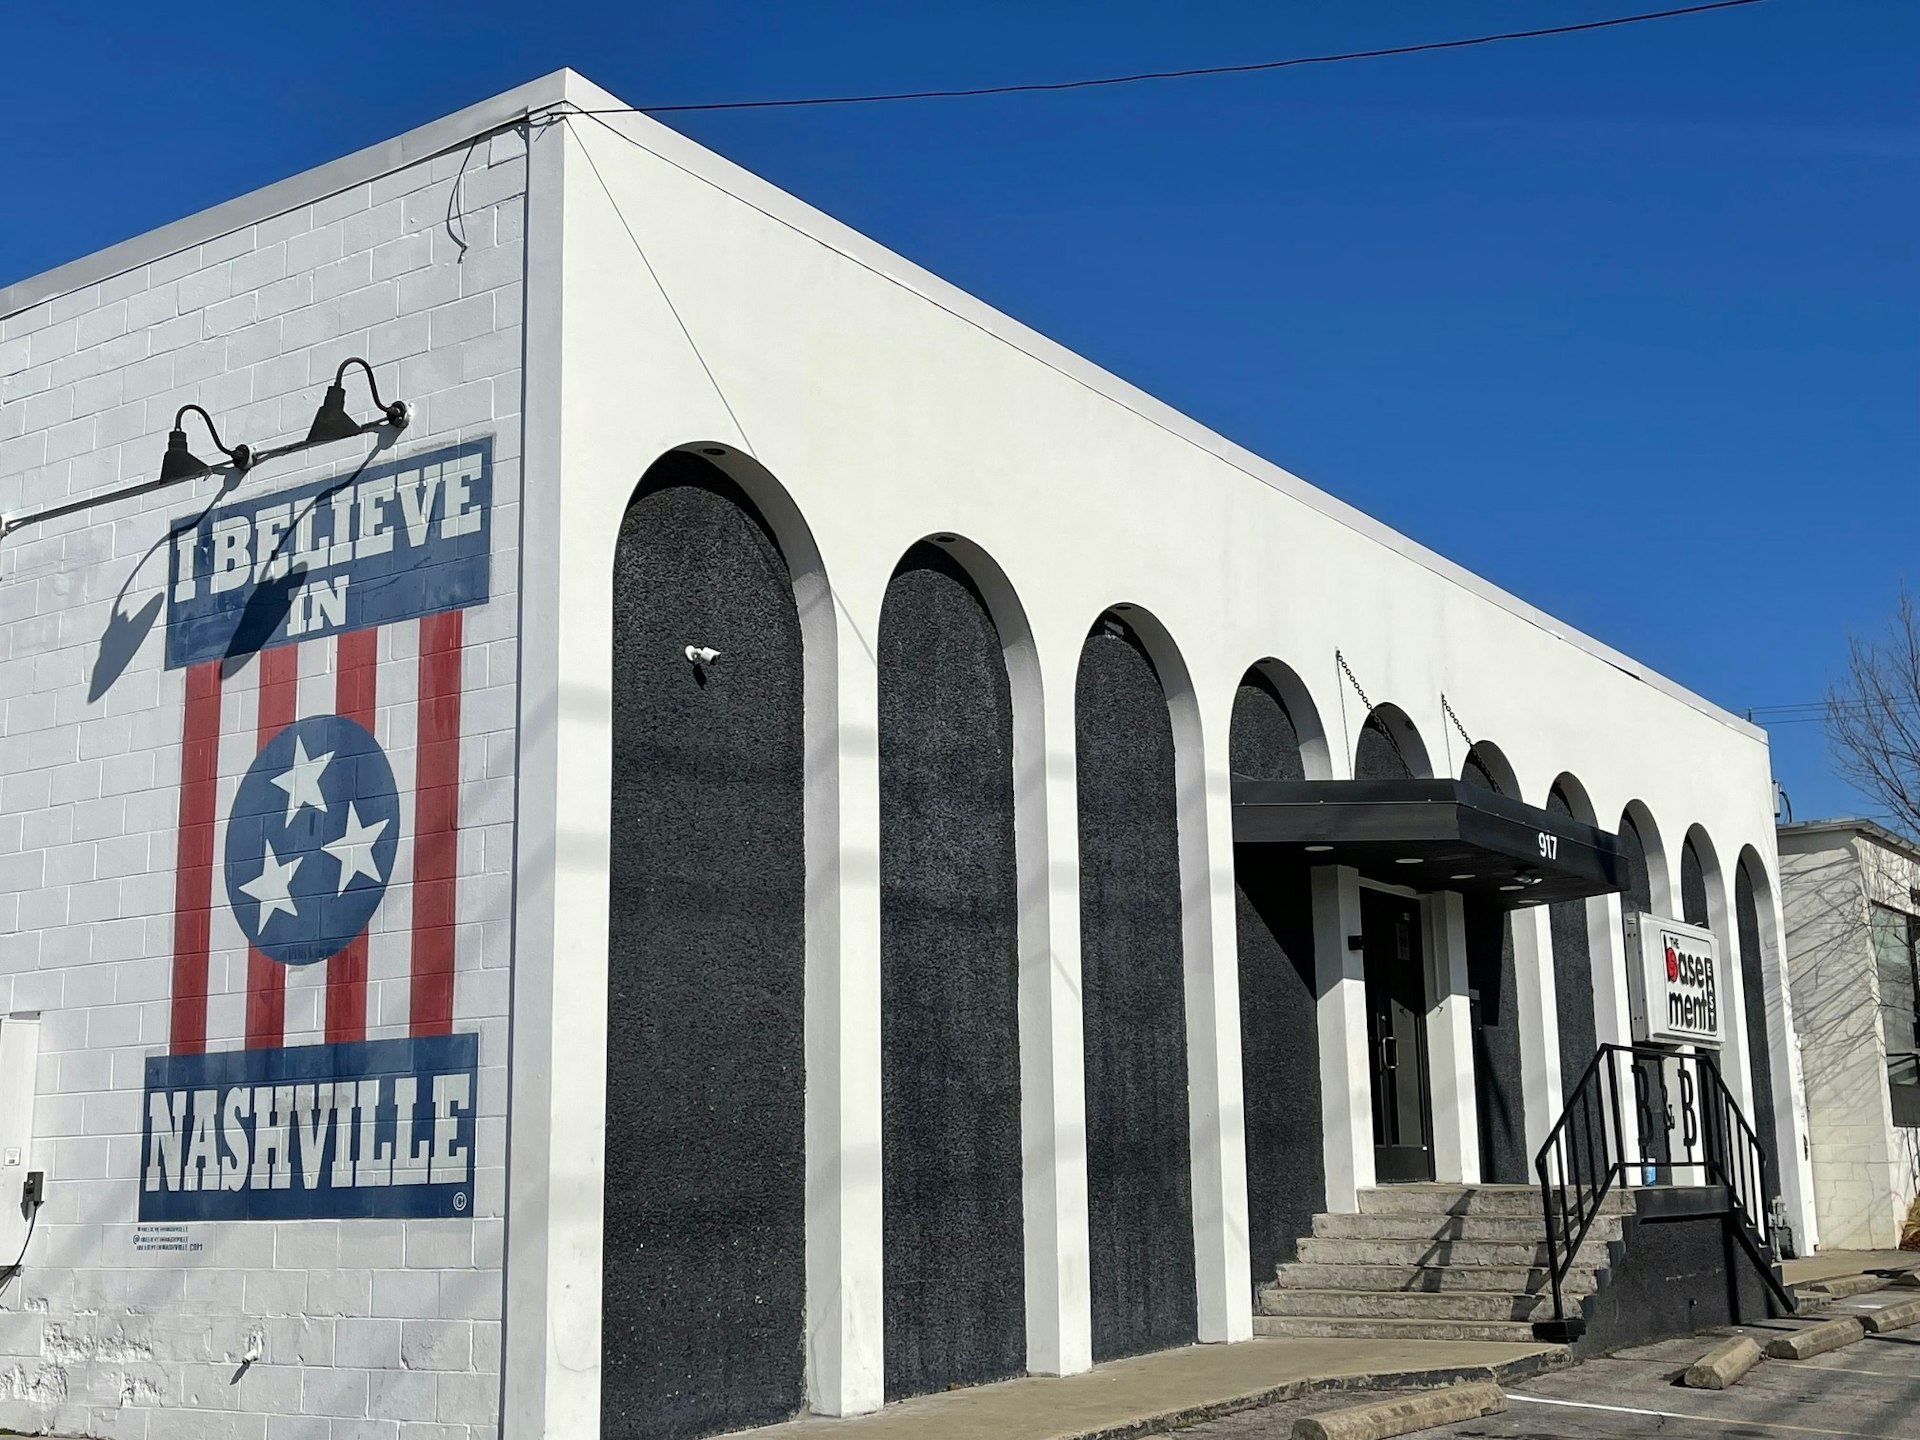 White facade of music venue with red, white and blue "I believe in Nashville" mural painted on the side.